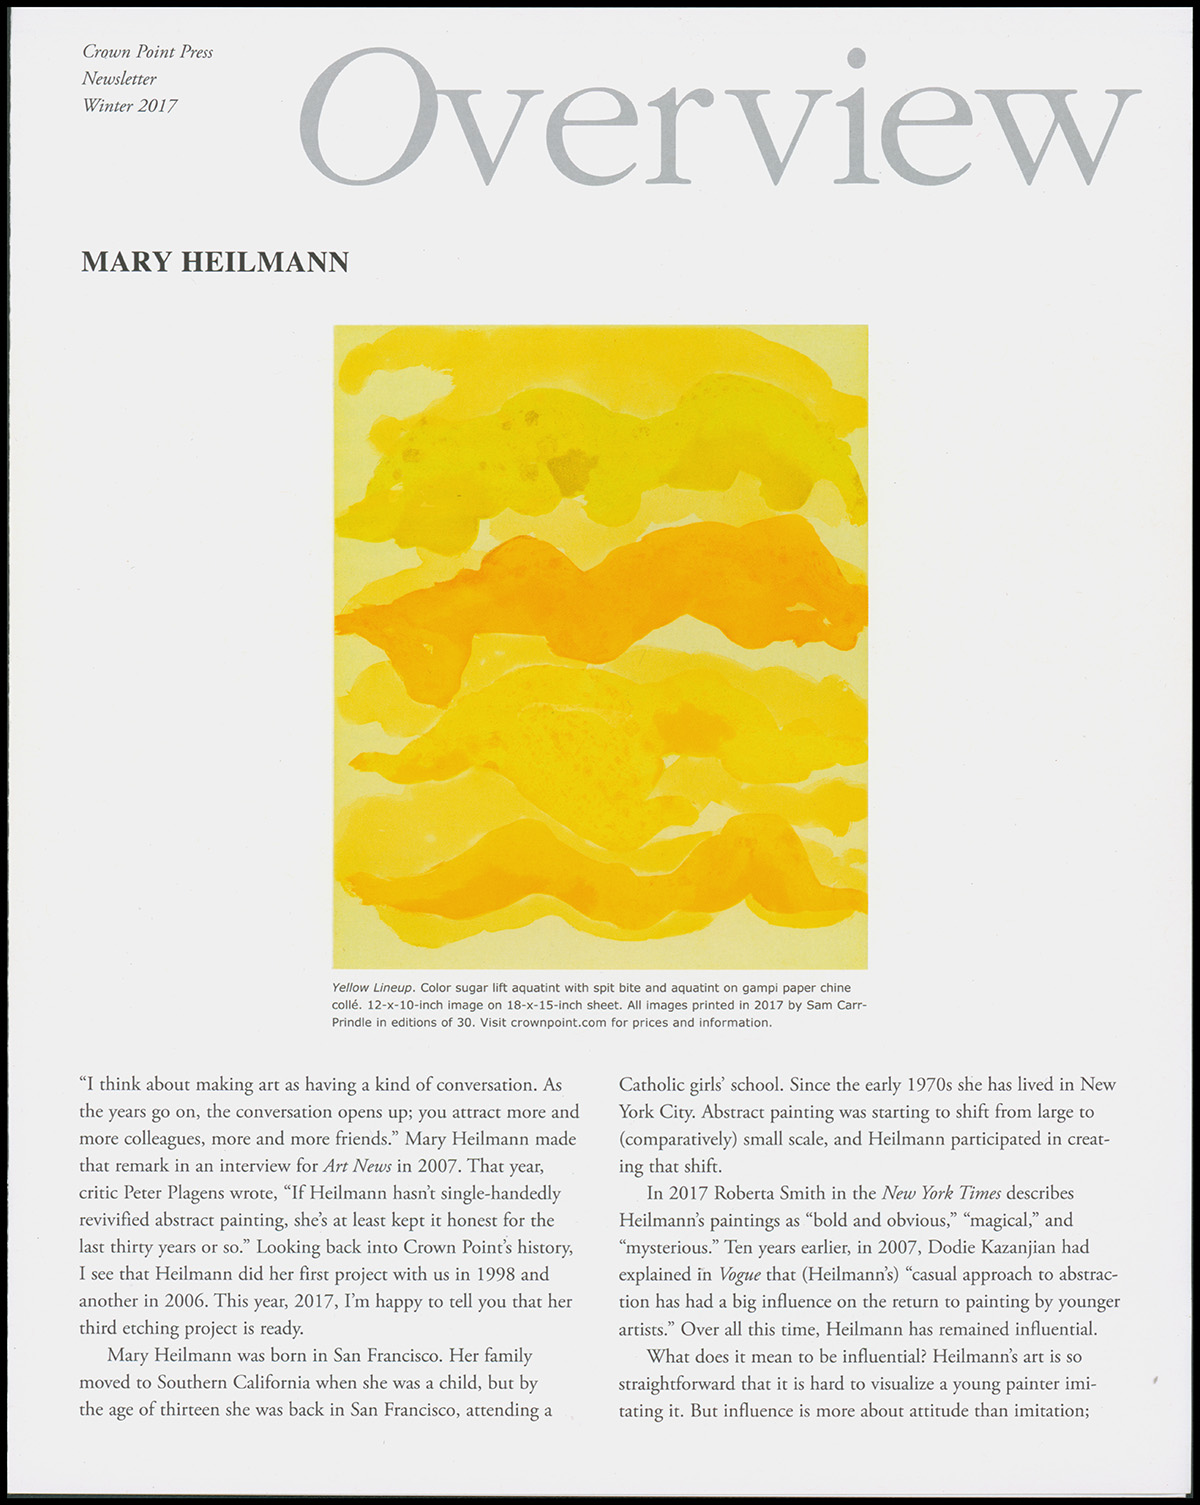 Brown, Kathan - Overview: Mary Heilmann (Winter 2017, Brochure)